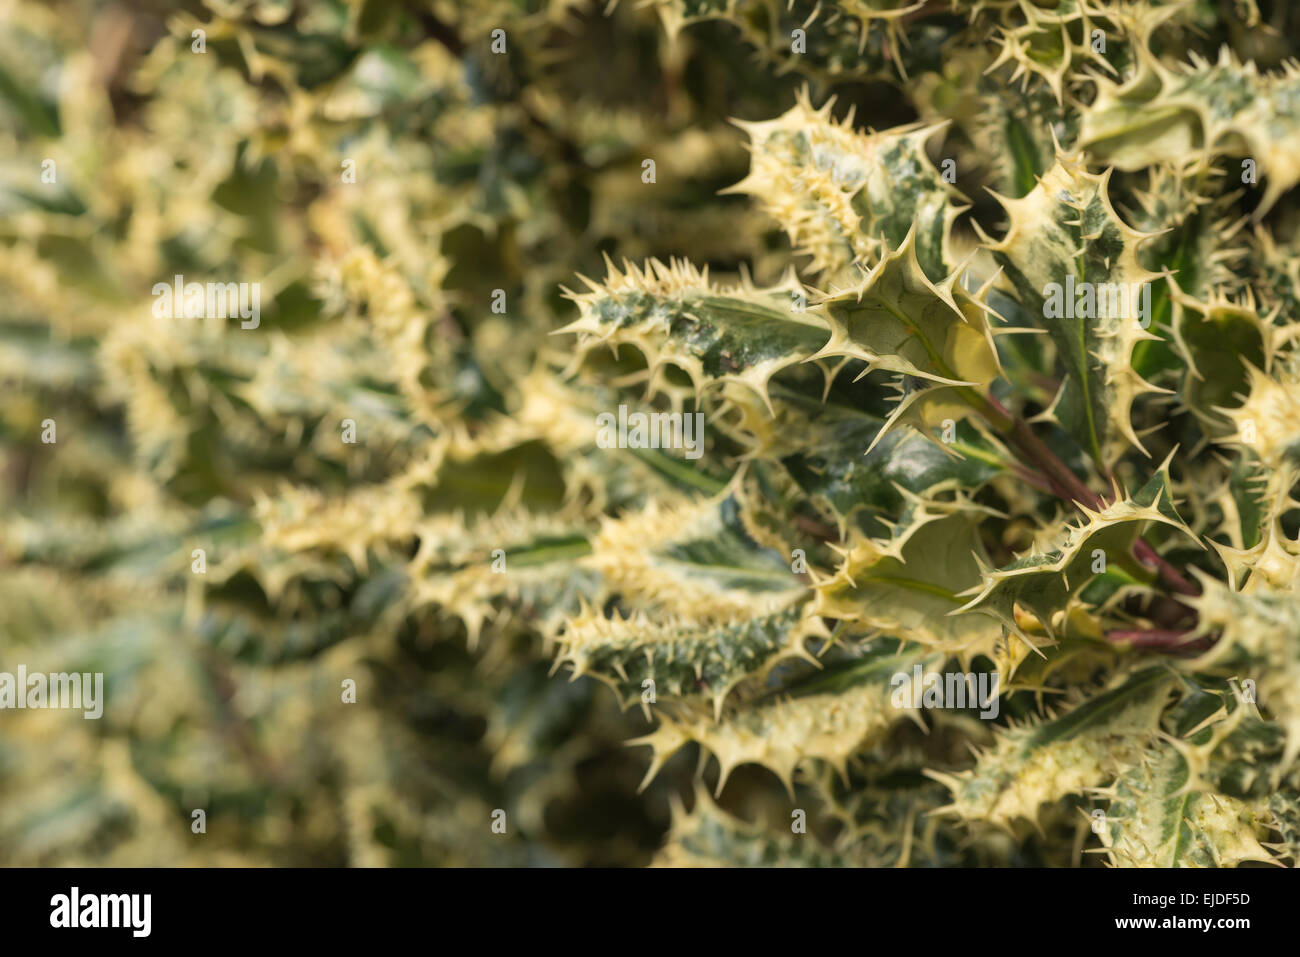 over prickly silver variegated holly leave genetic mutation with prickles on edge and surface of leaf a bush to deter buglers Stock Photo